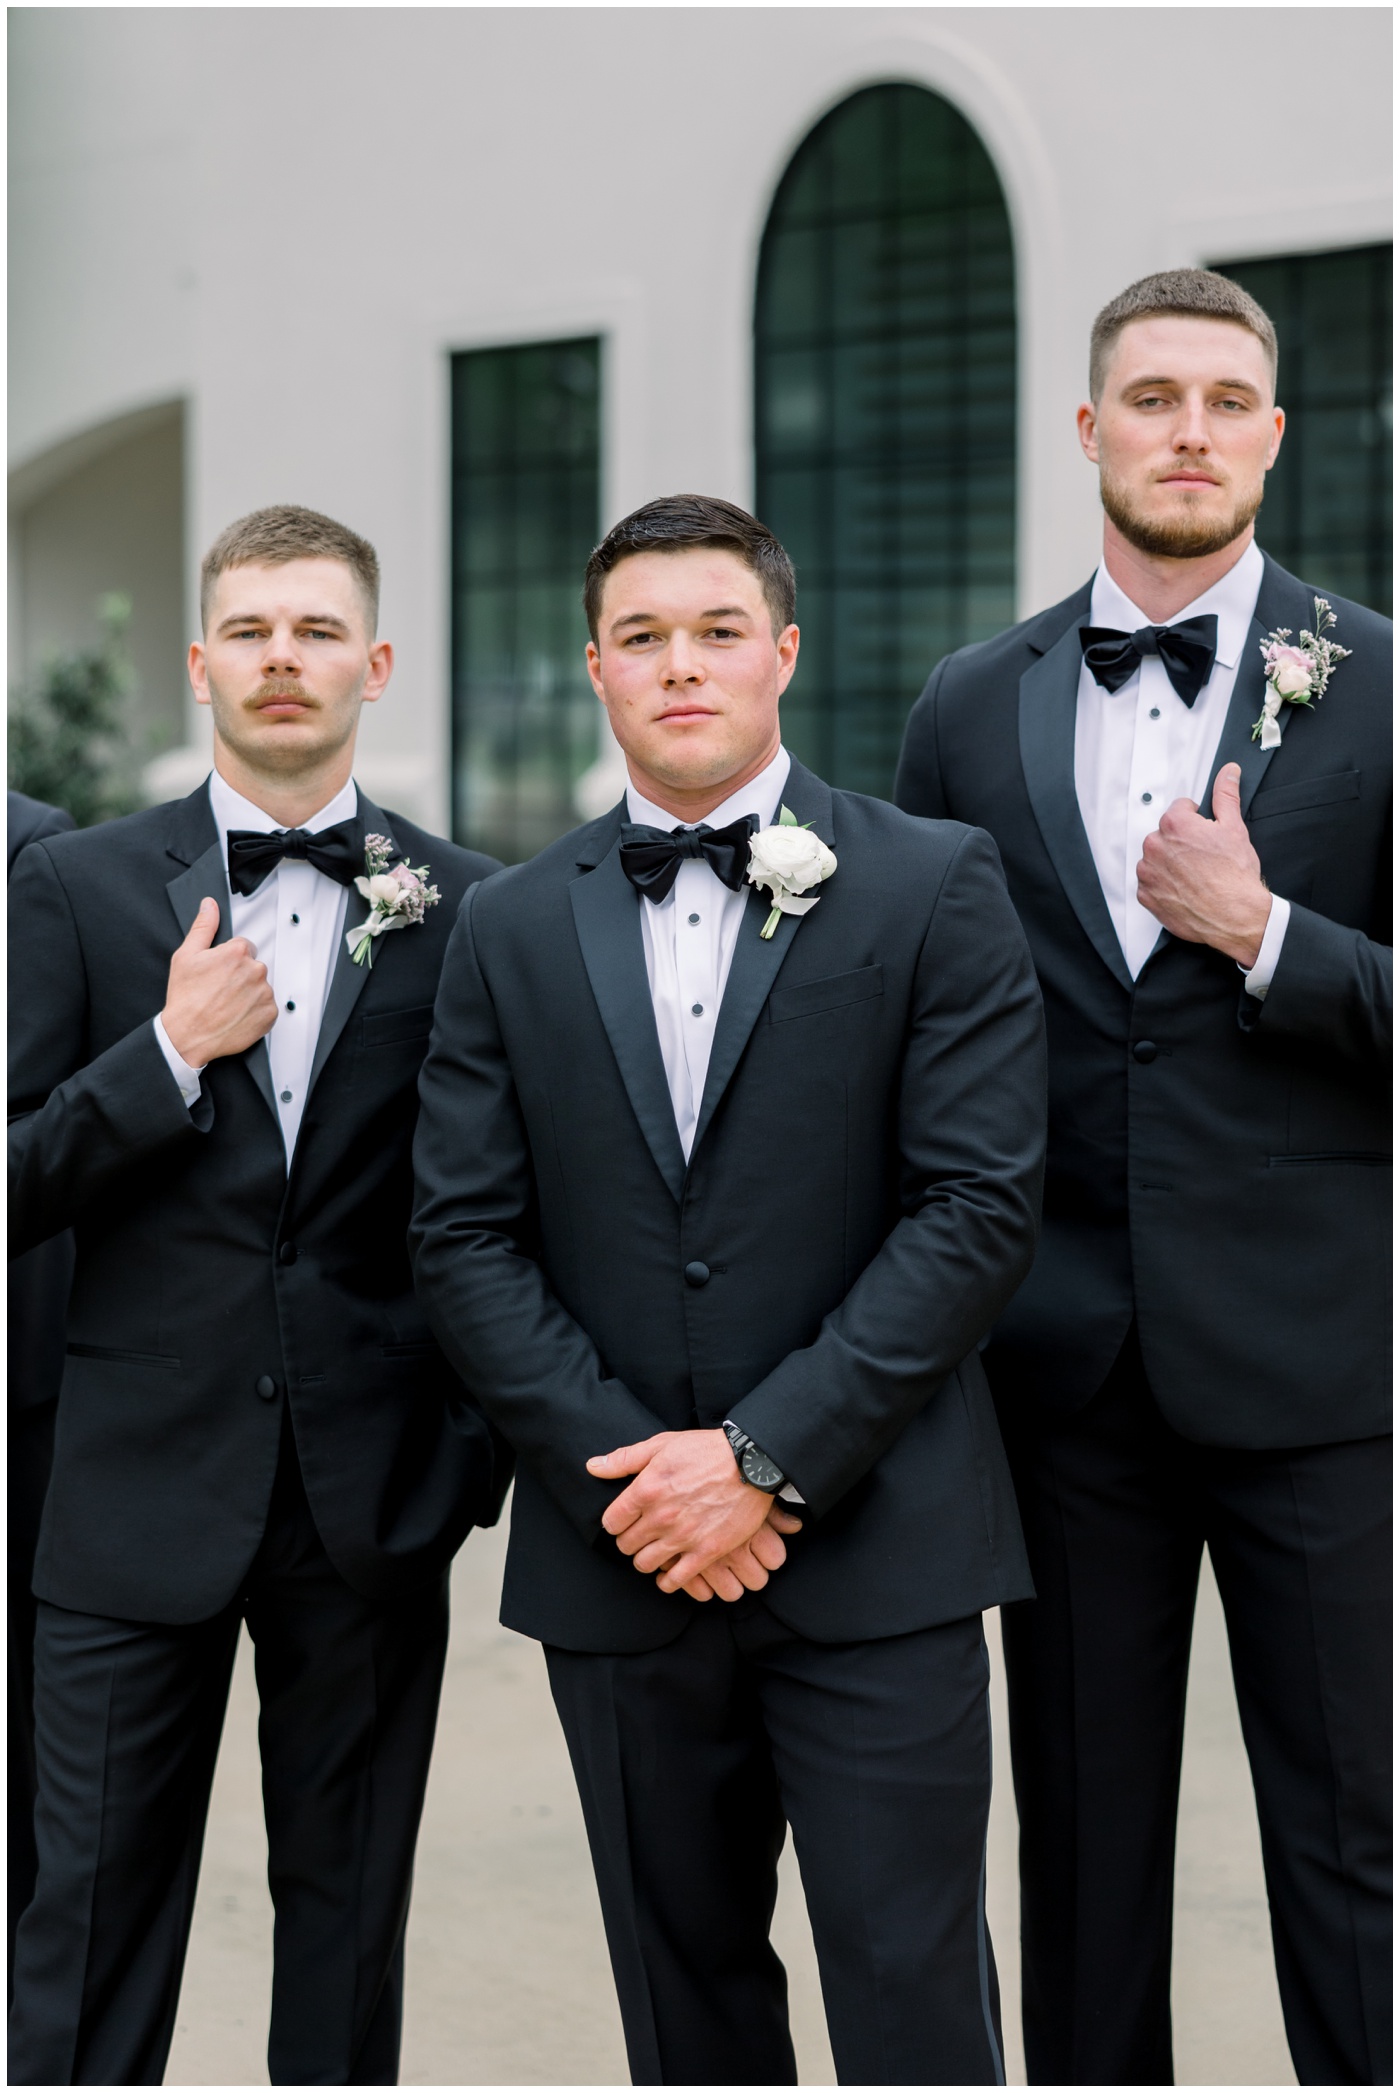 A groom and his groomsmen